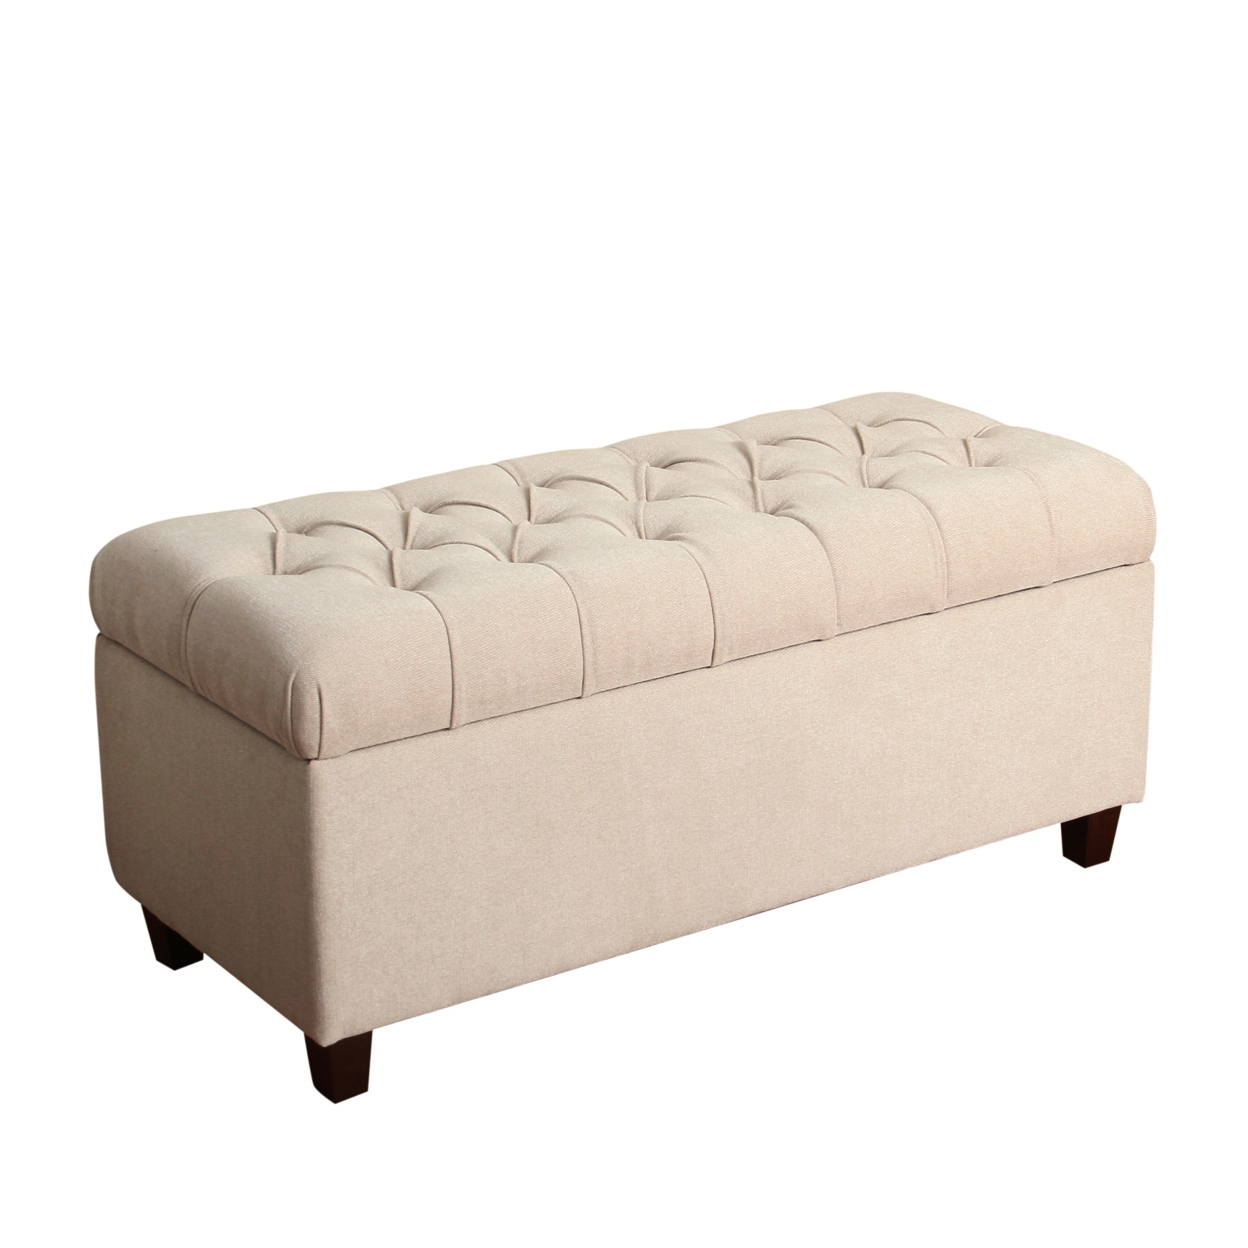 Fabric Upholstered Button Tufted Wooden Bench With Hinged Storage, Cream And Brown- Saltoro Sherpi